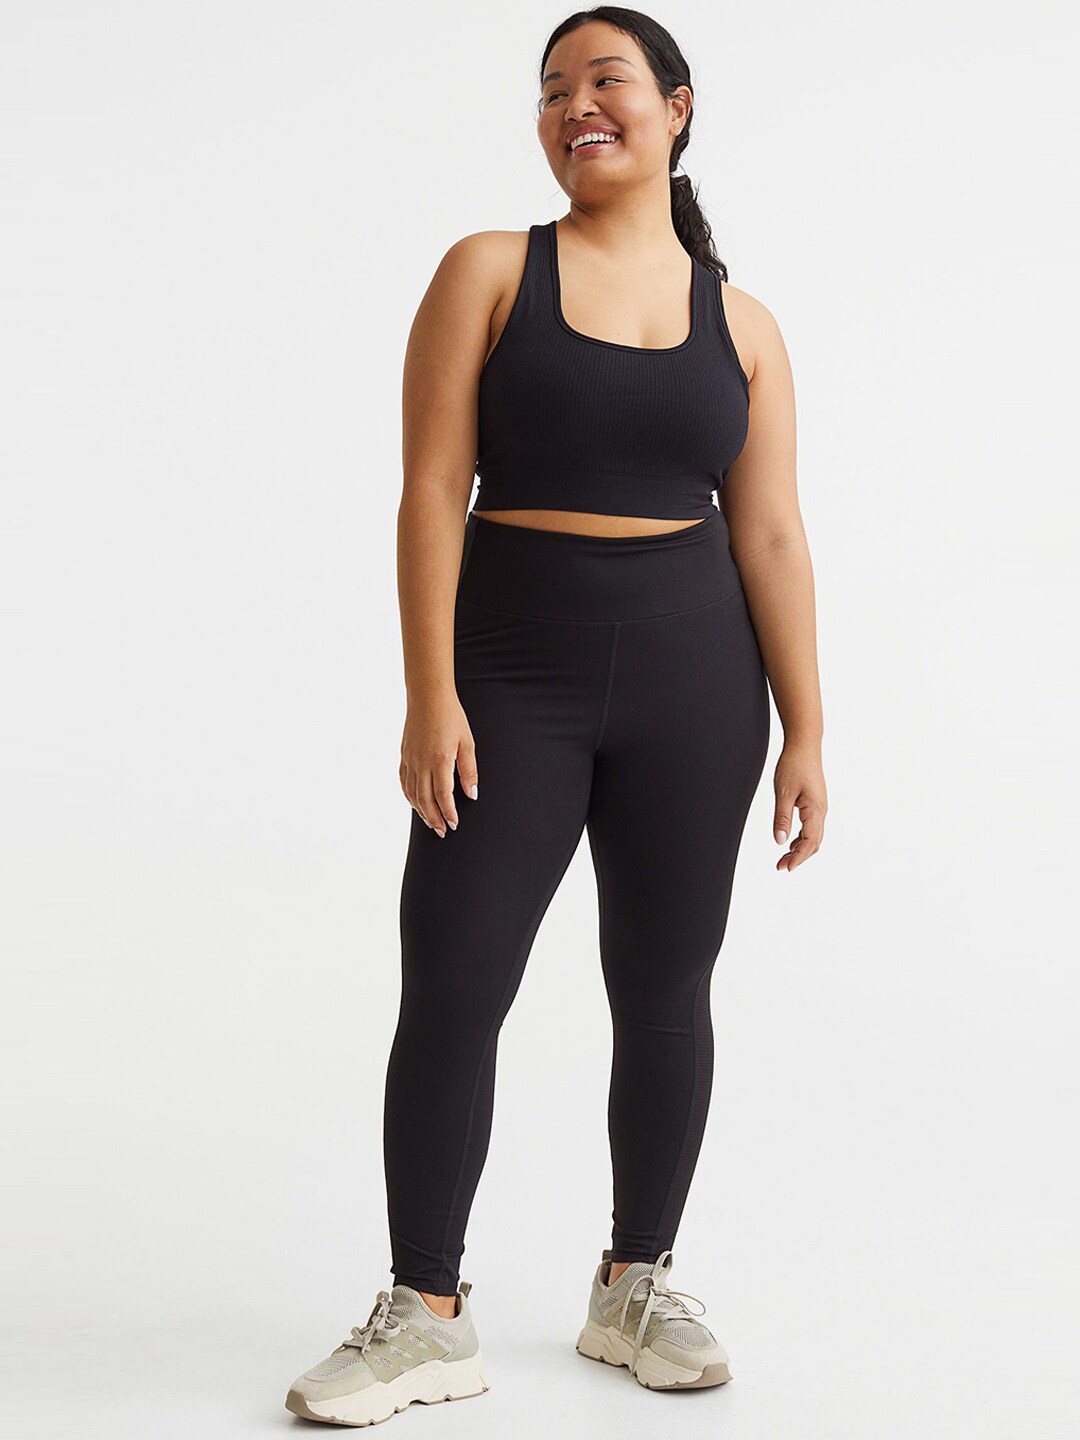 H&M+ Women Sports Tights Price in India